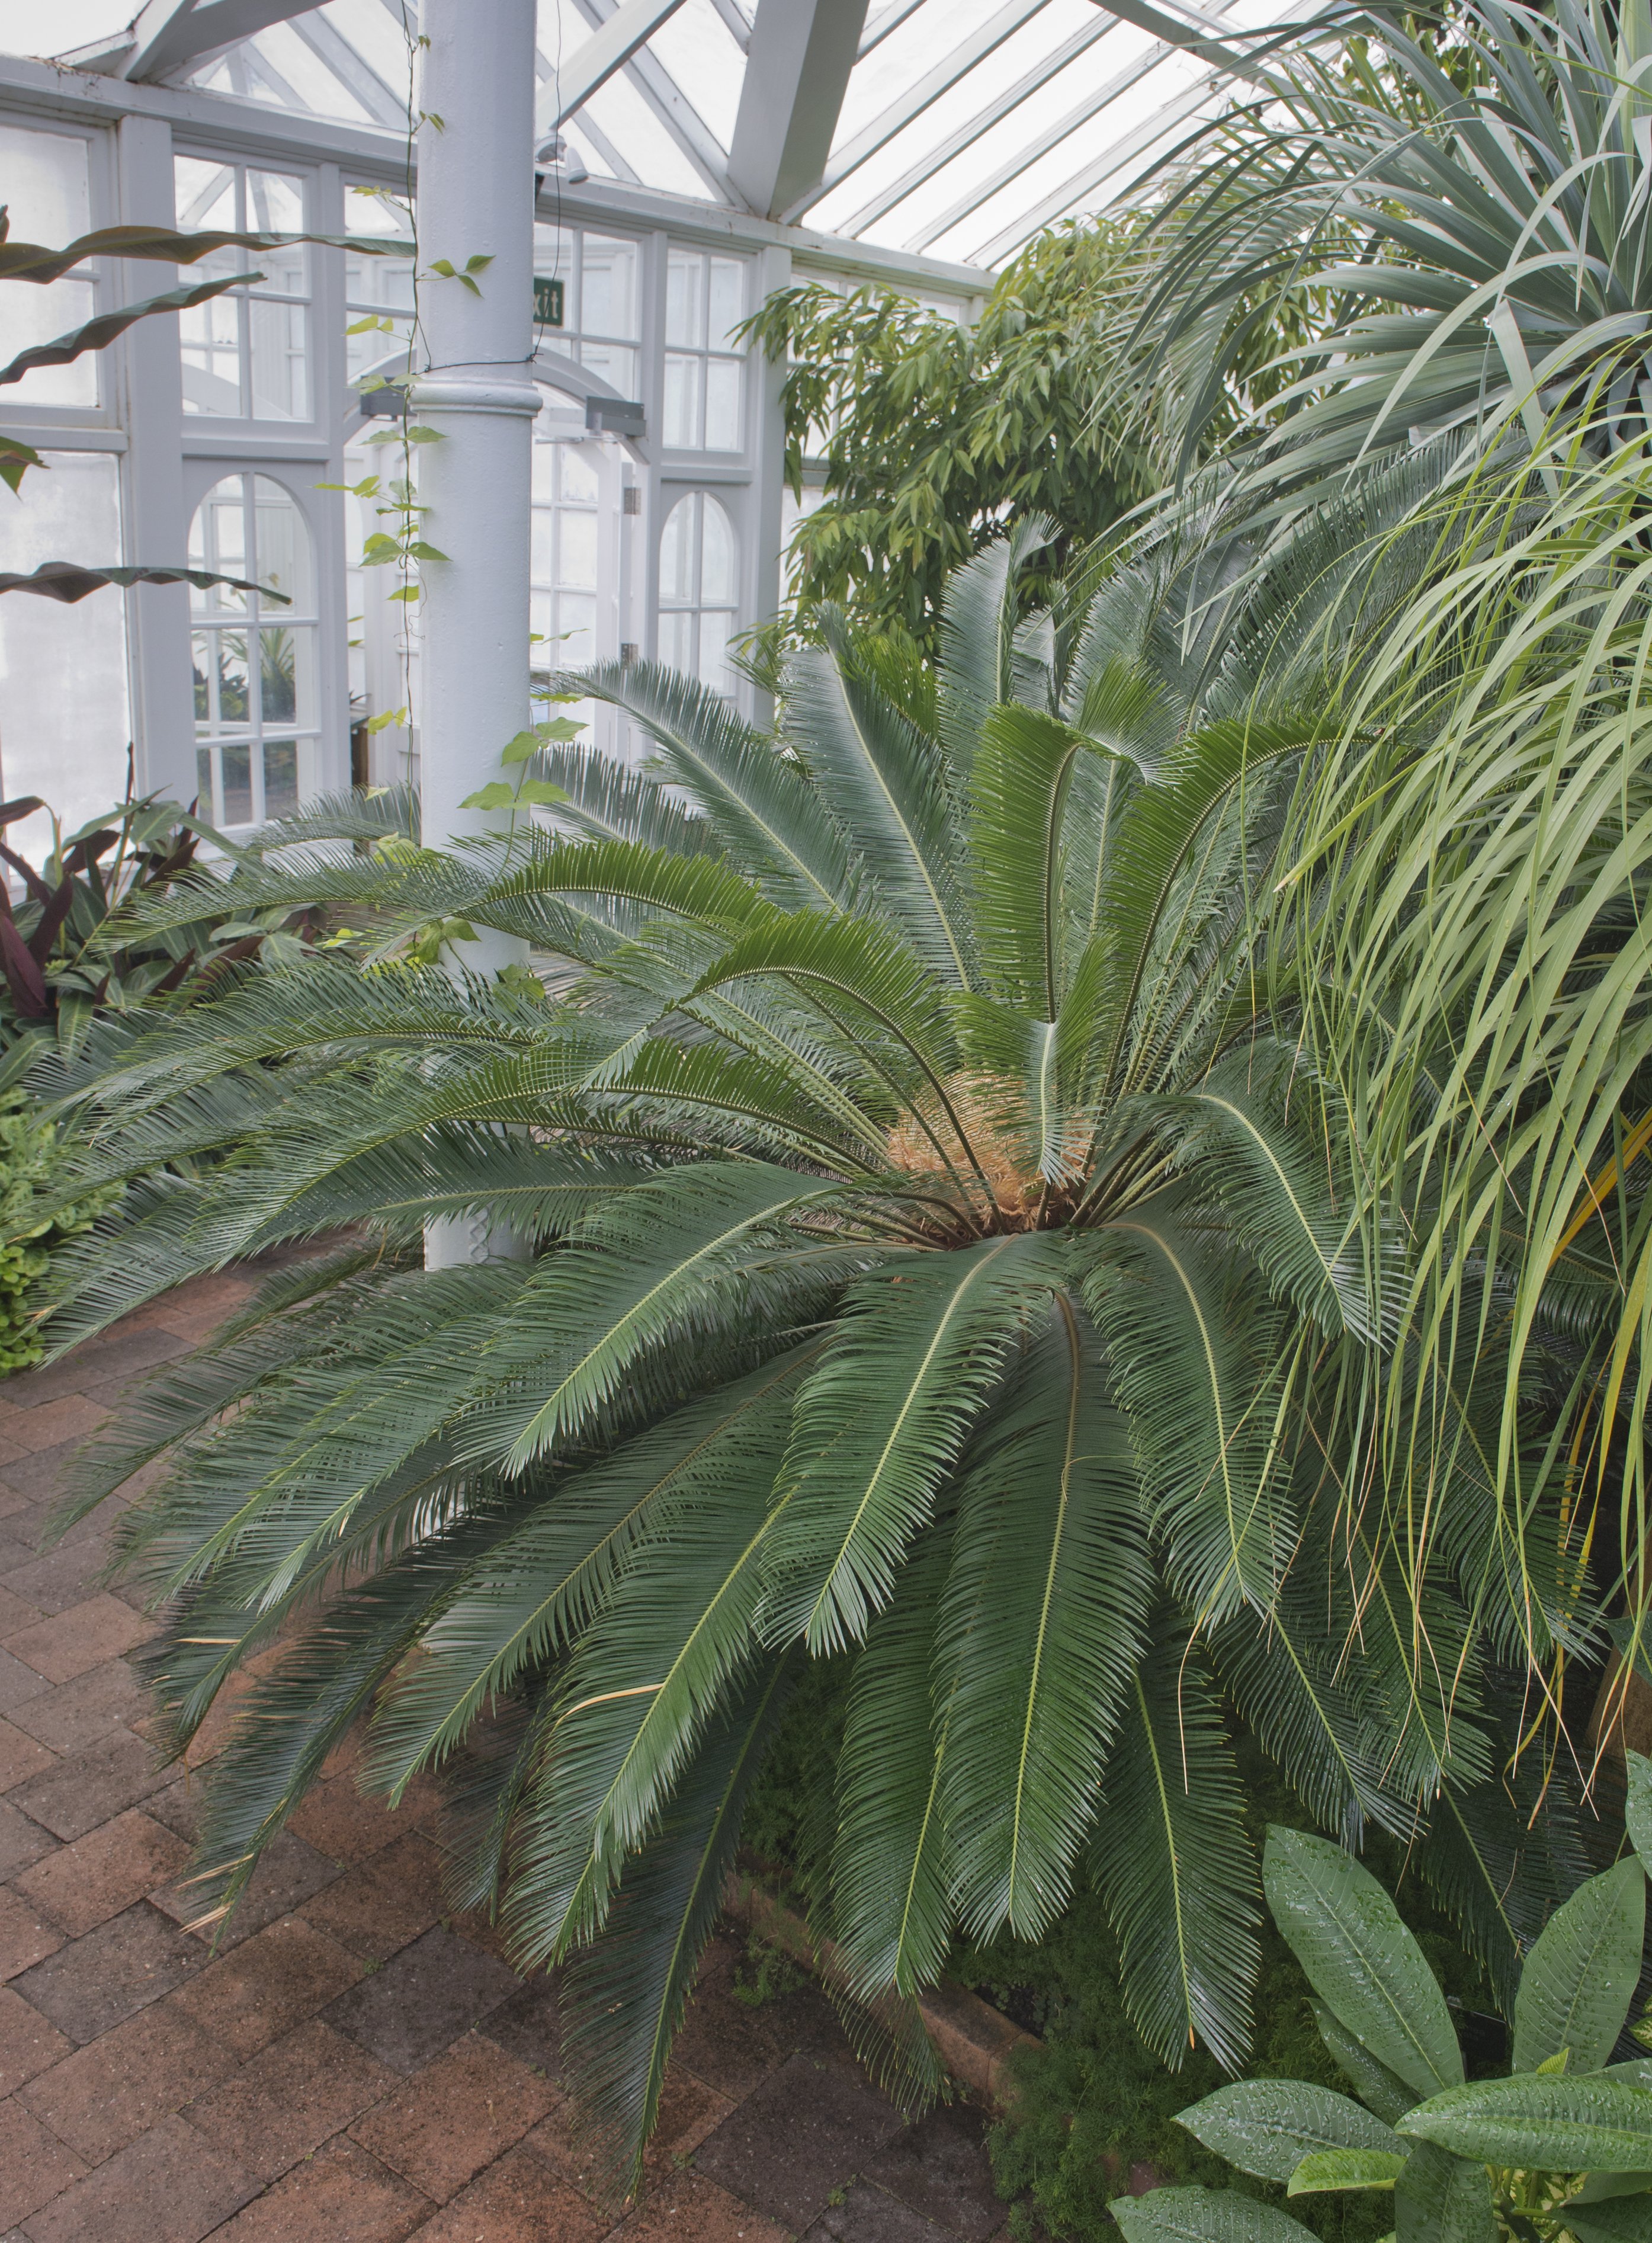 Cycas taiwaniana is on show in the winter garden glasshouse. PHOTO: GERARD O’BRIEN